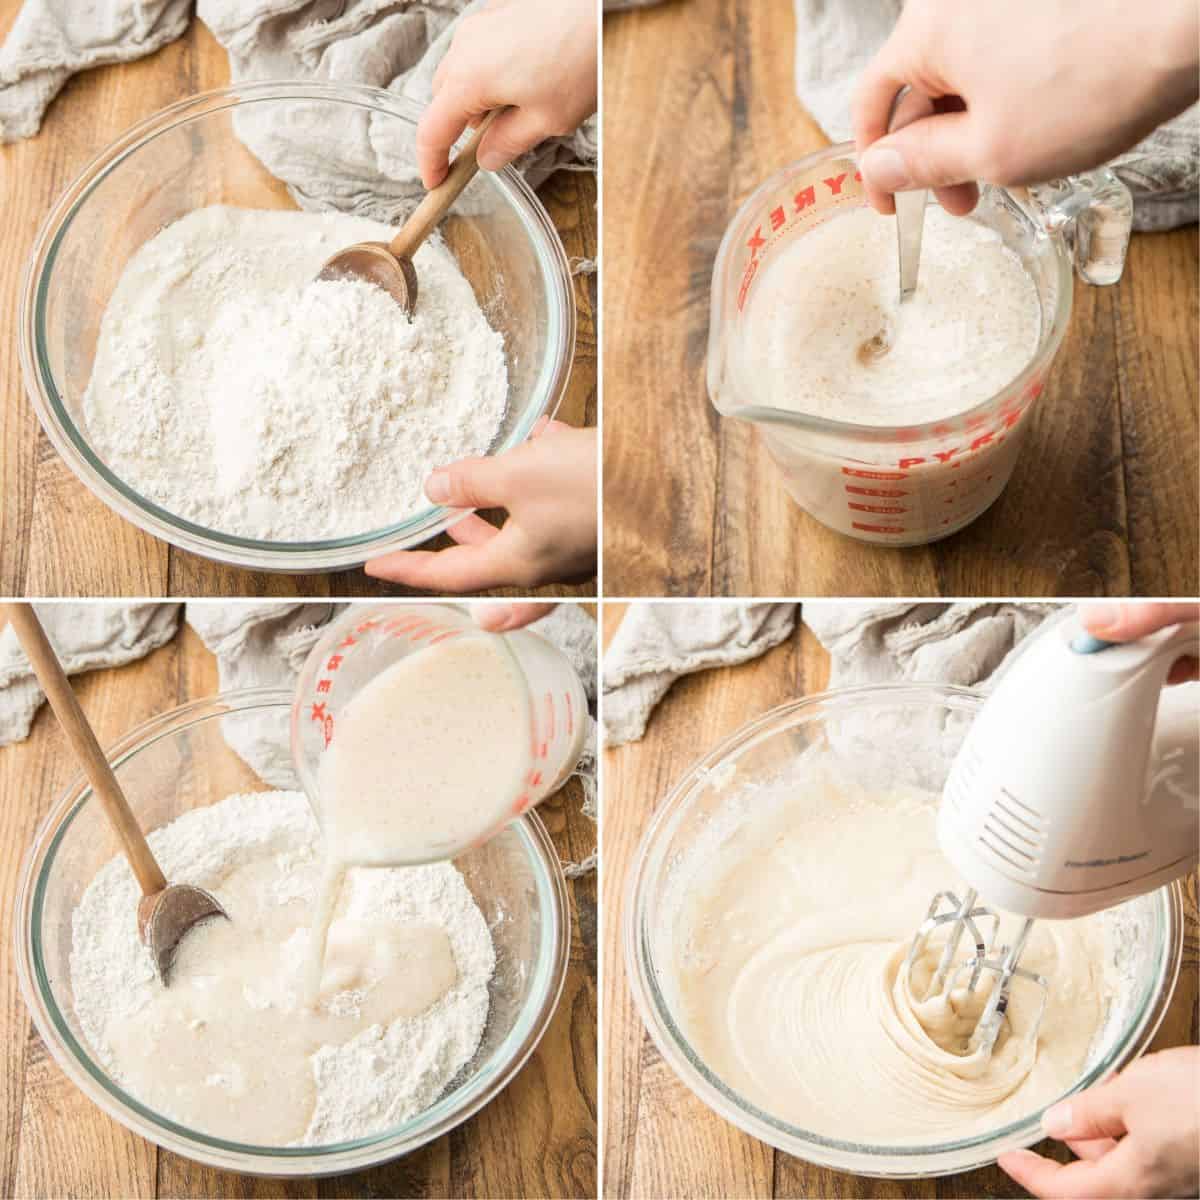 Collage Showing First 4 Steps for Making Vegan Coconut Cake: Mix Dry Ingredients, Mix Liquid Ingredients, Pour Liquid Ingredients into Dry, and Beat with a Mixer